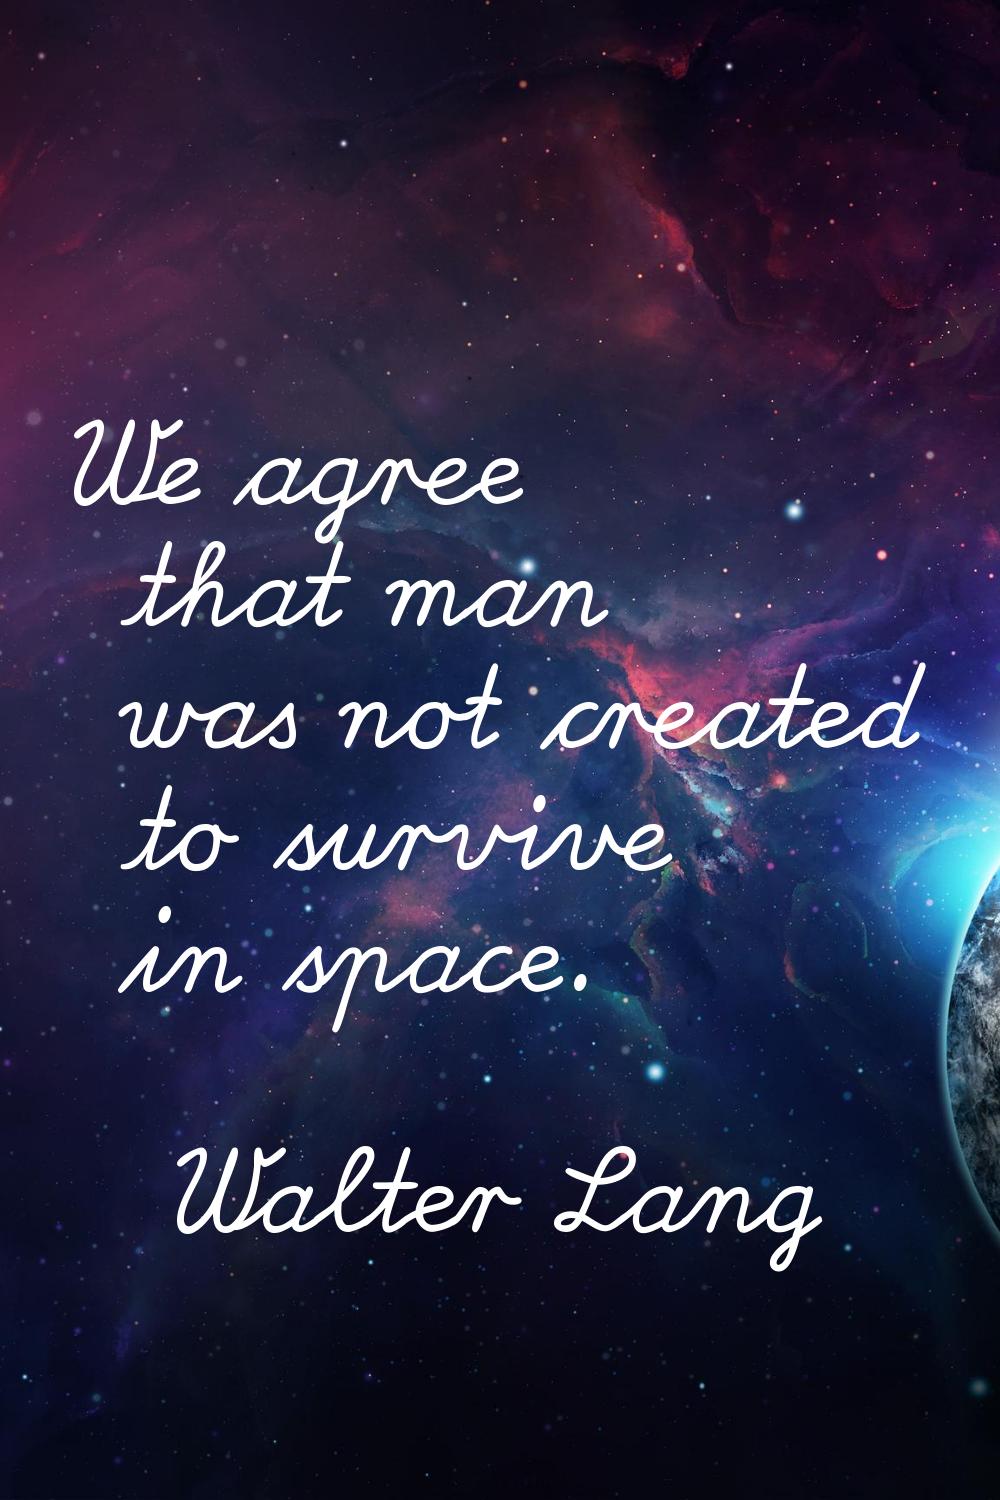 We agree that man was not created to survive in space.